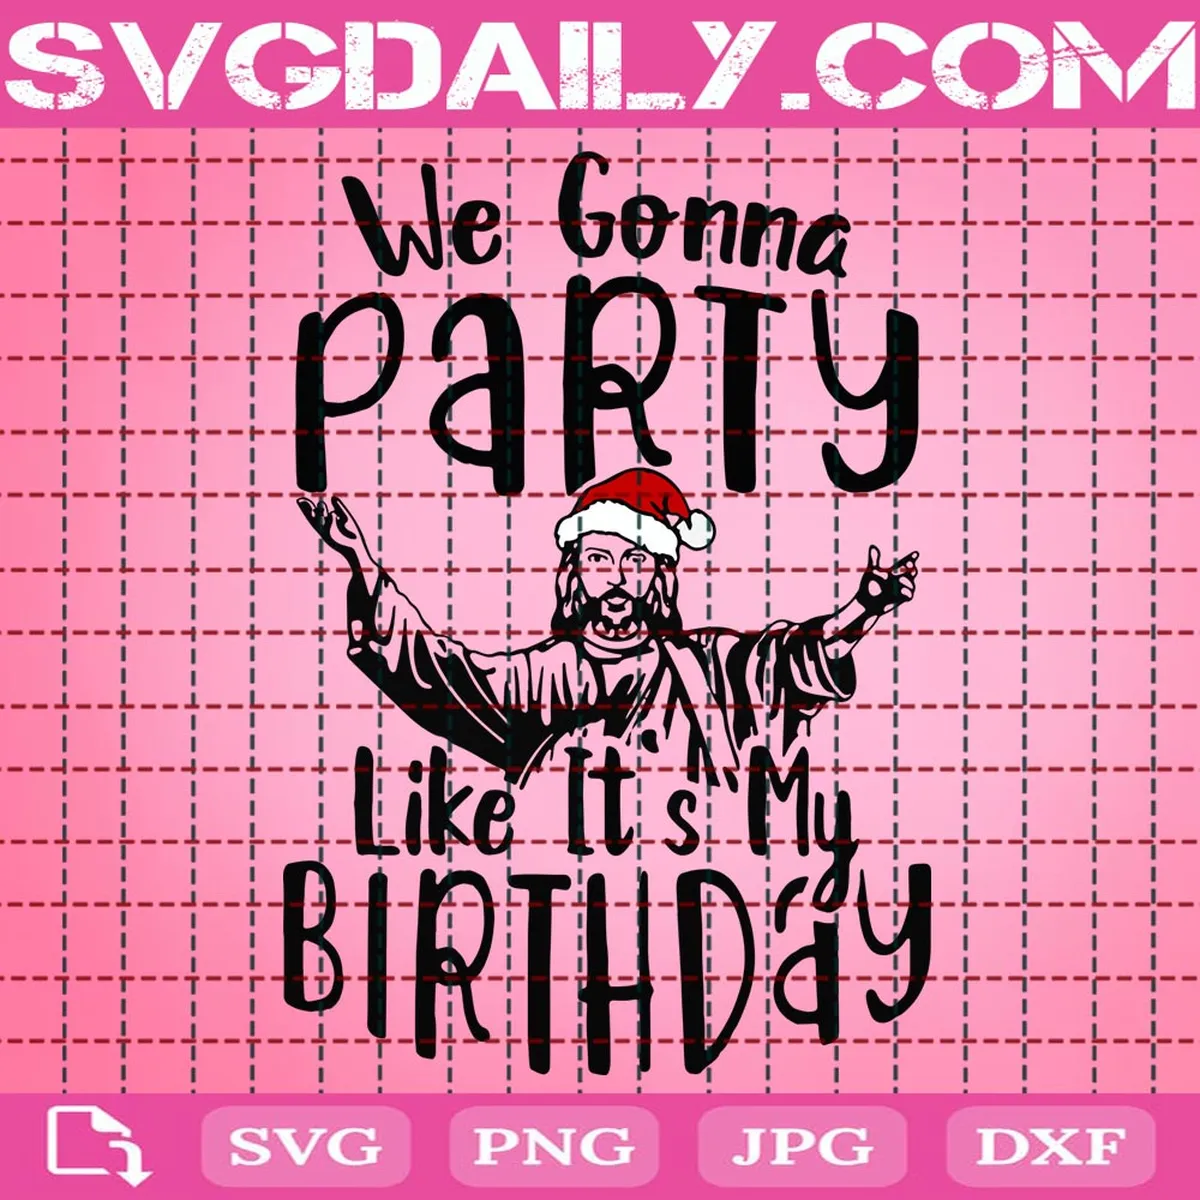 We Gonna Party Like It'S My Birthday Svg